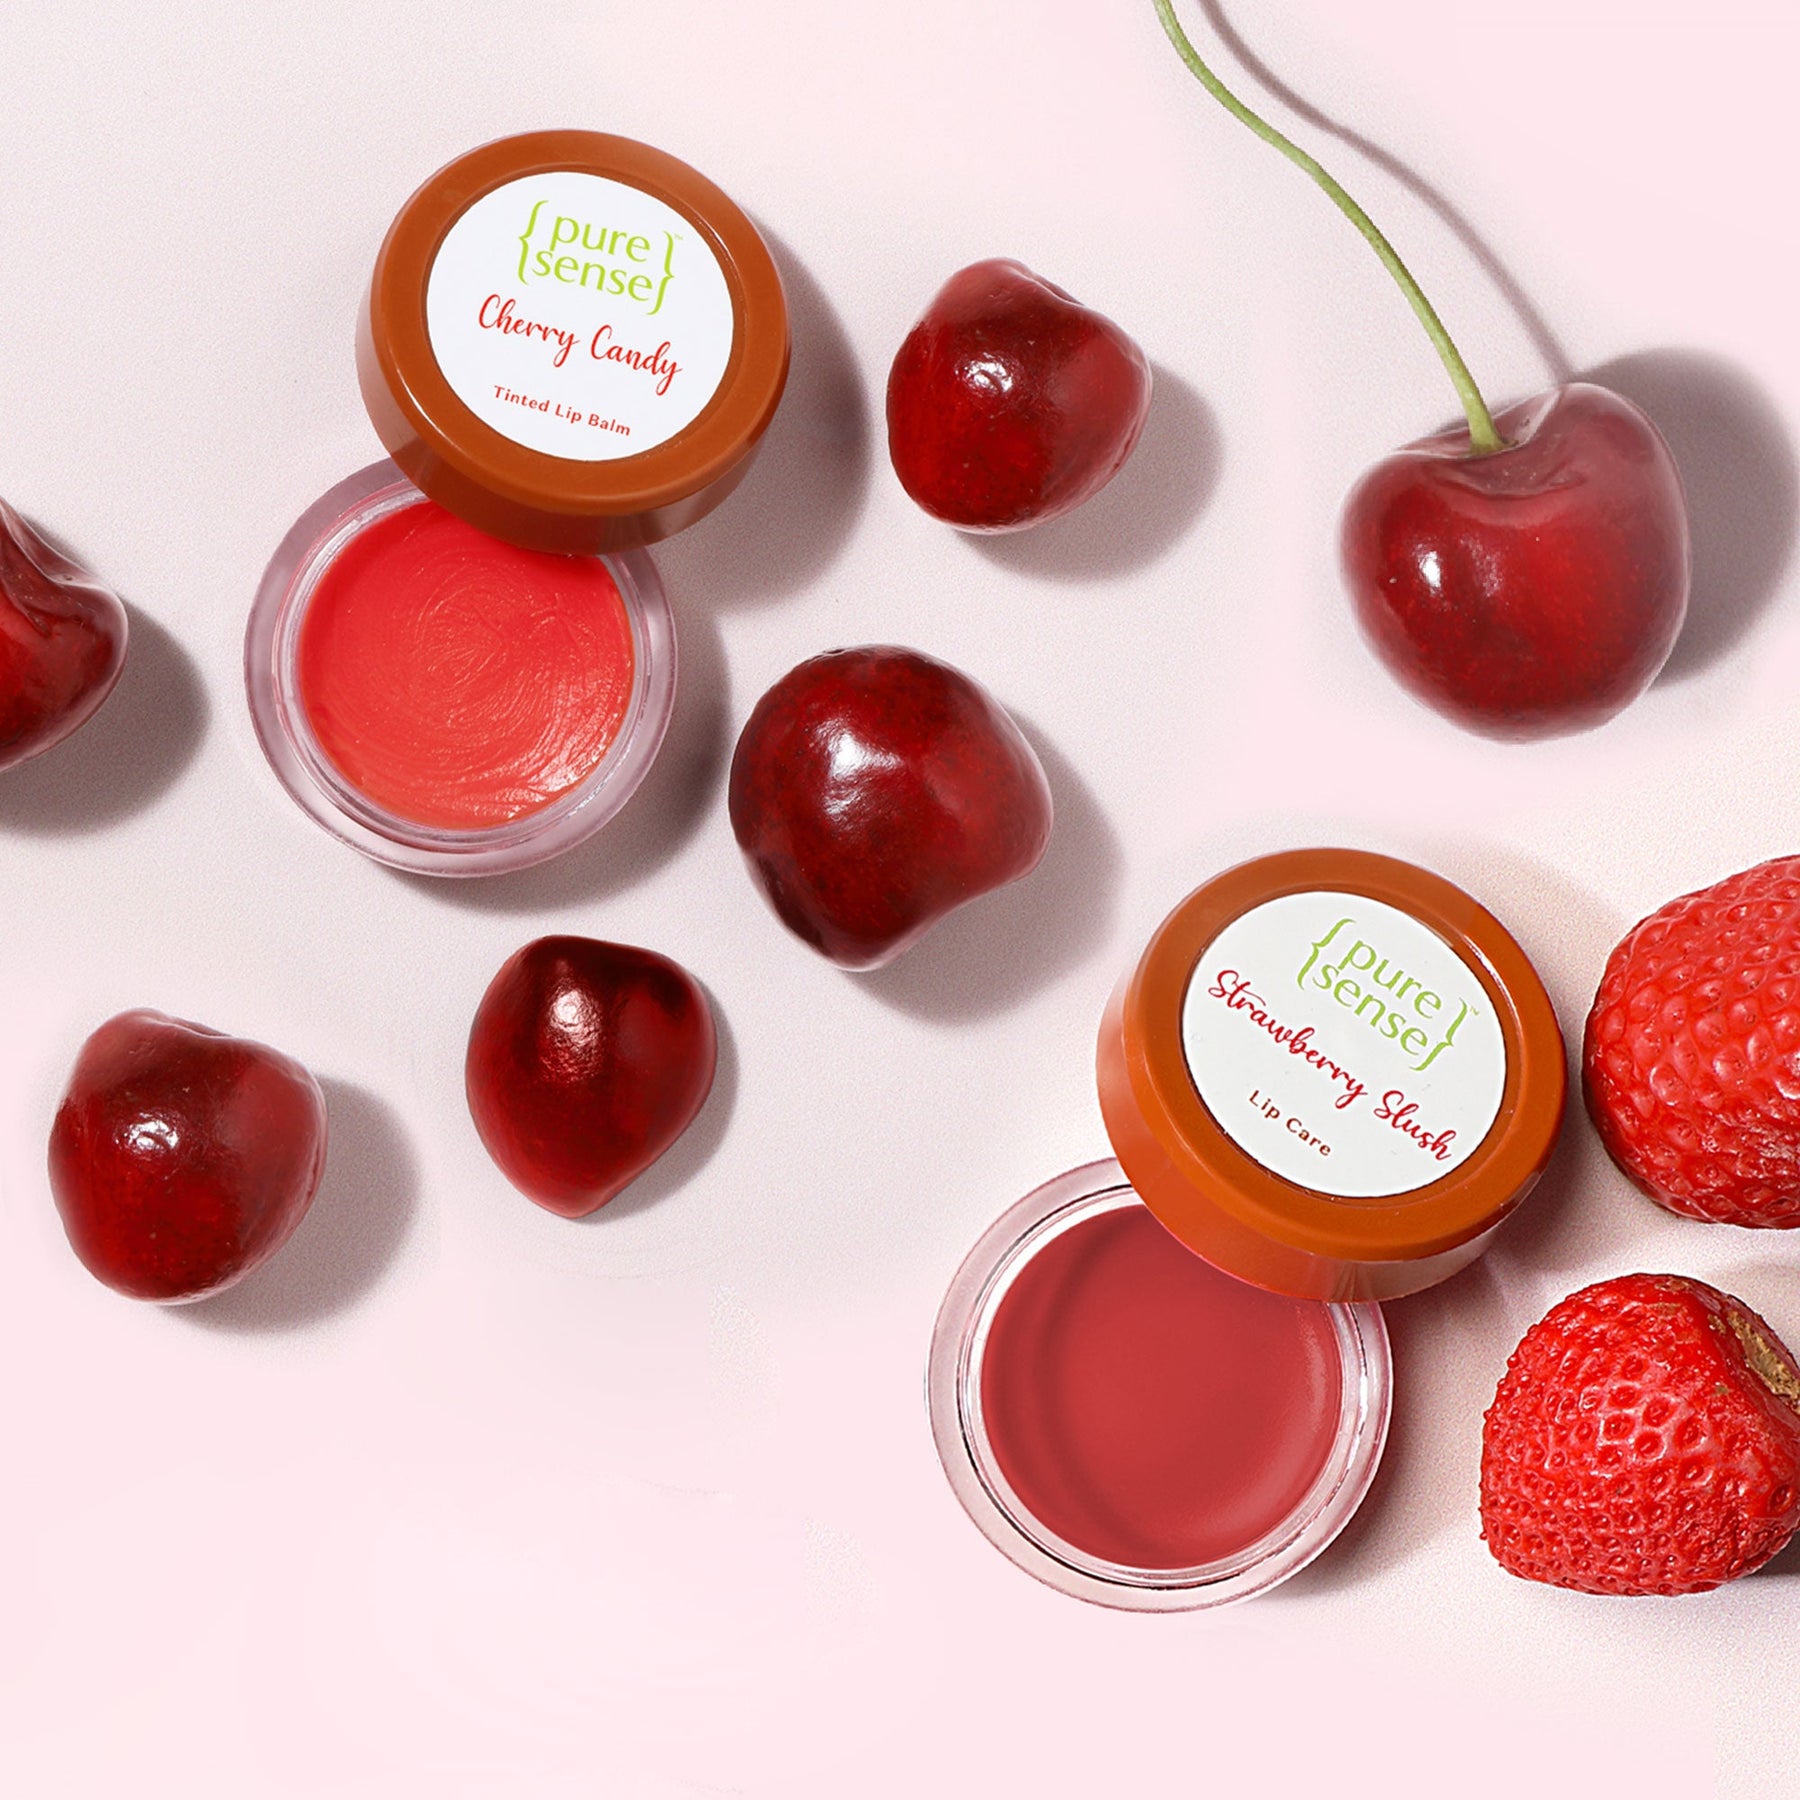 [CRED] Cherry Candy Tinted Lip Balm 5ml +  Strawberry Slush Lip Balm 5m | Pack of 2 | From the makers of Parachute Advansed | 10ml